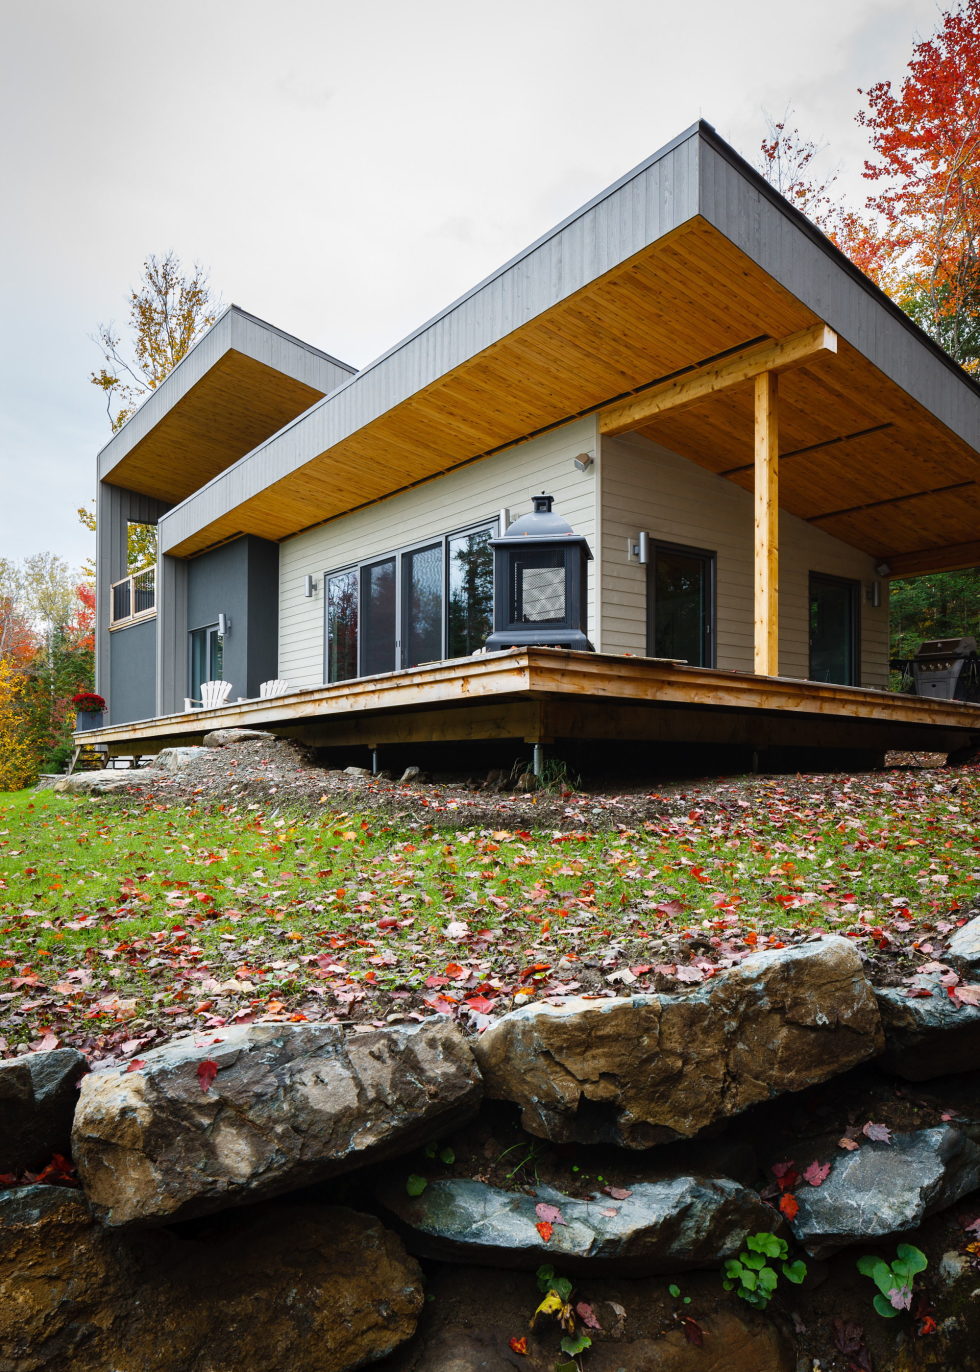 The country house in Canada from the BOOM TOWN studio 6